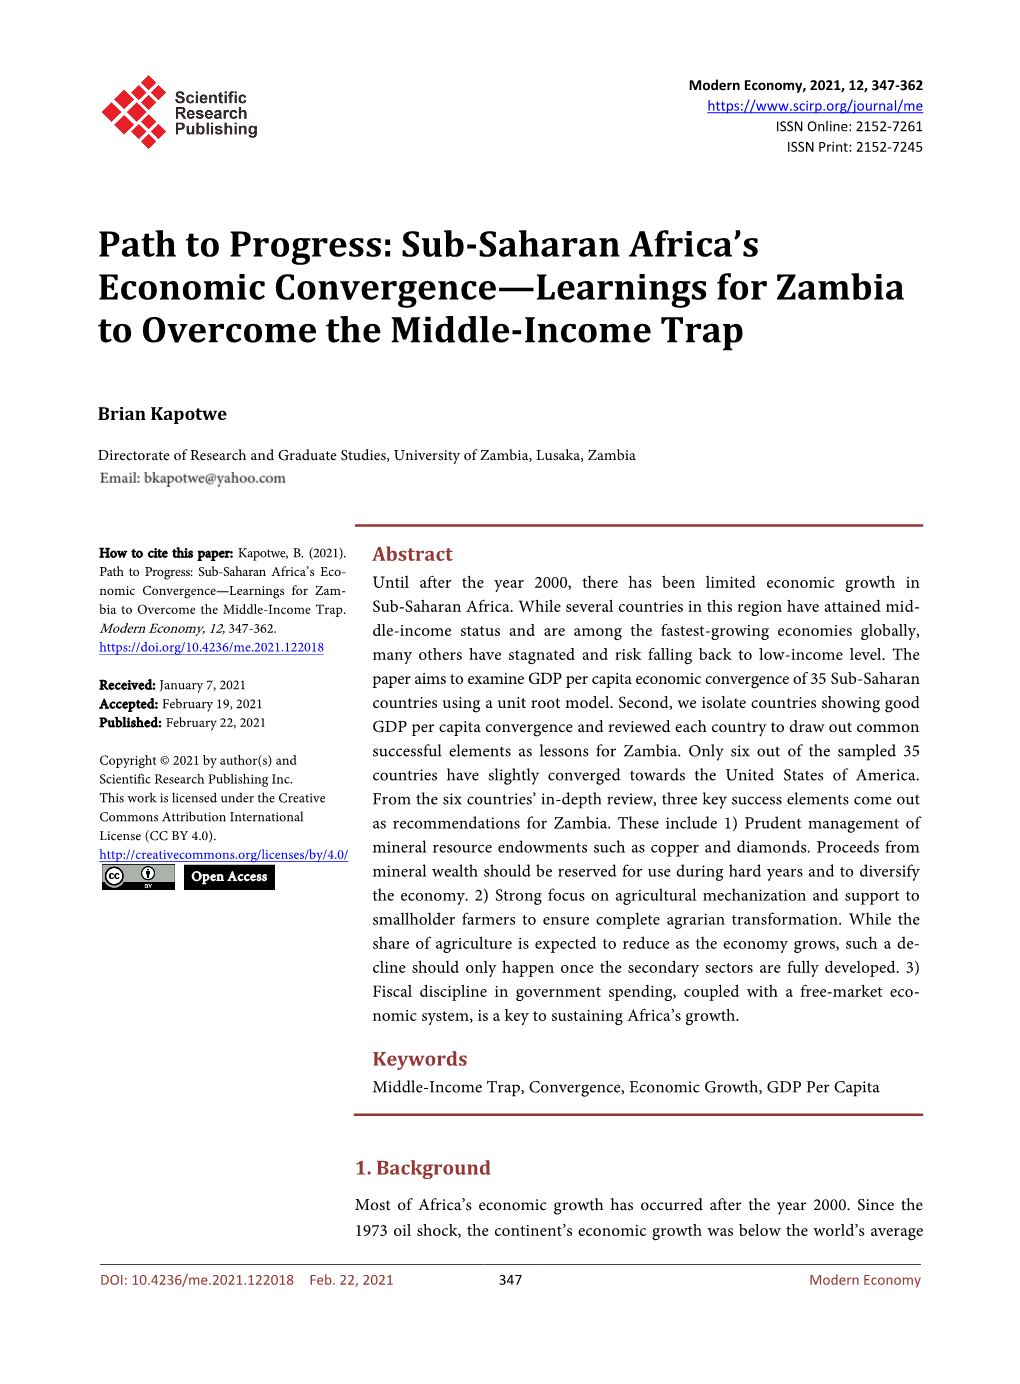 Sub-Saharan Africa's Economic Convergence—Learnings for Zambia to Overcome the Middle-Income Trap